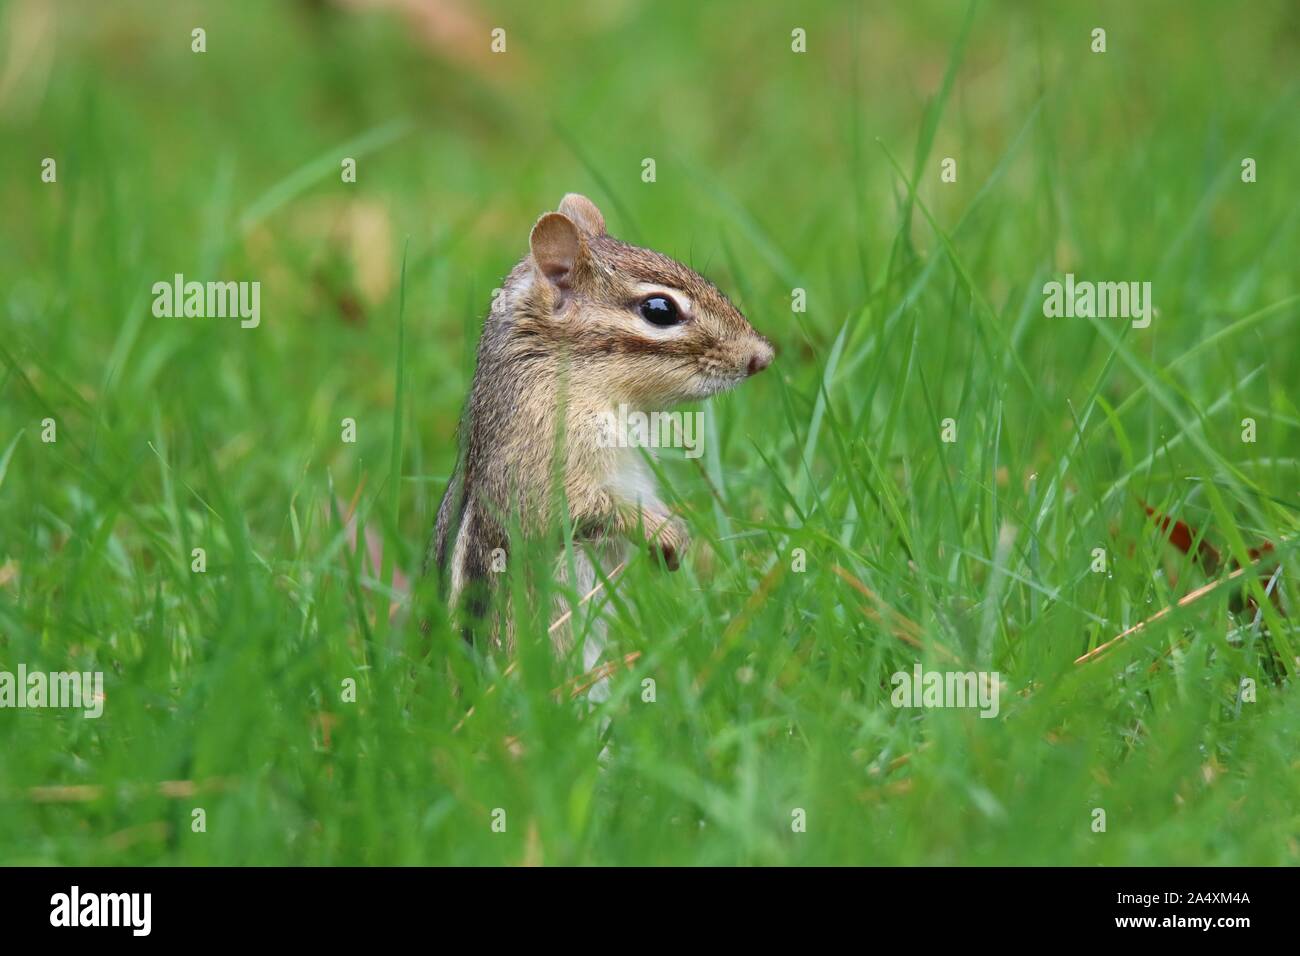 https://c8.alamy.com/comp/2A4XM4A/an-eastern-chipmunk-in-fall-foraging-for-food-in-grass-to-store-away-for-winter-2A4XM4A.jpg